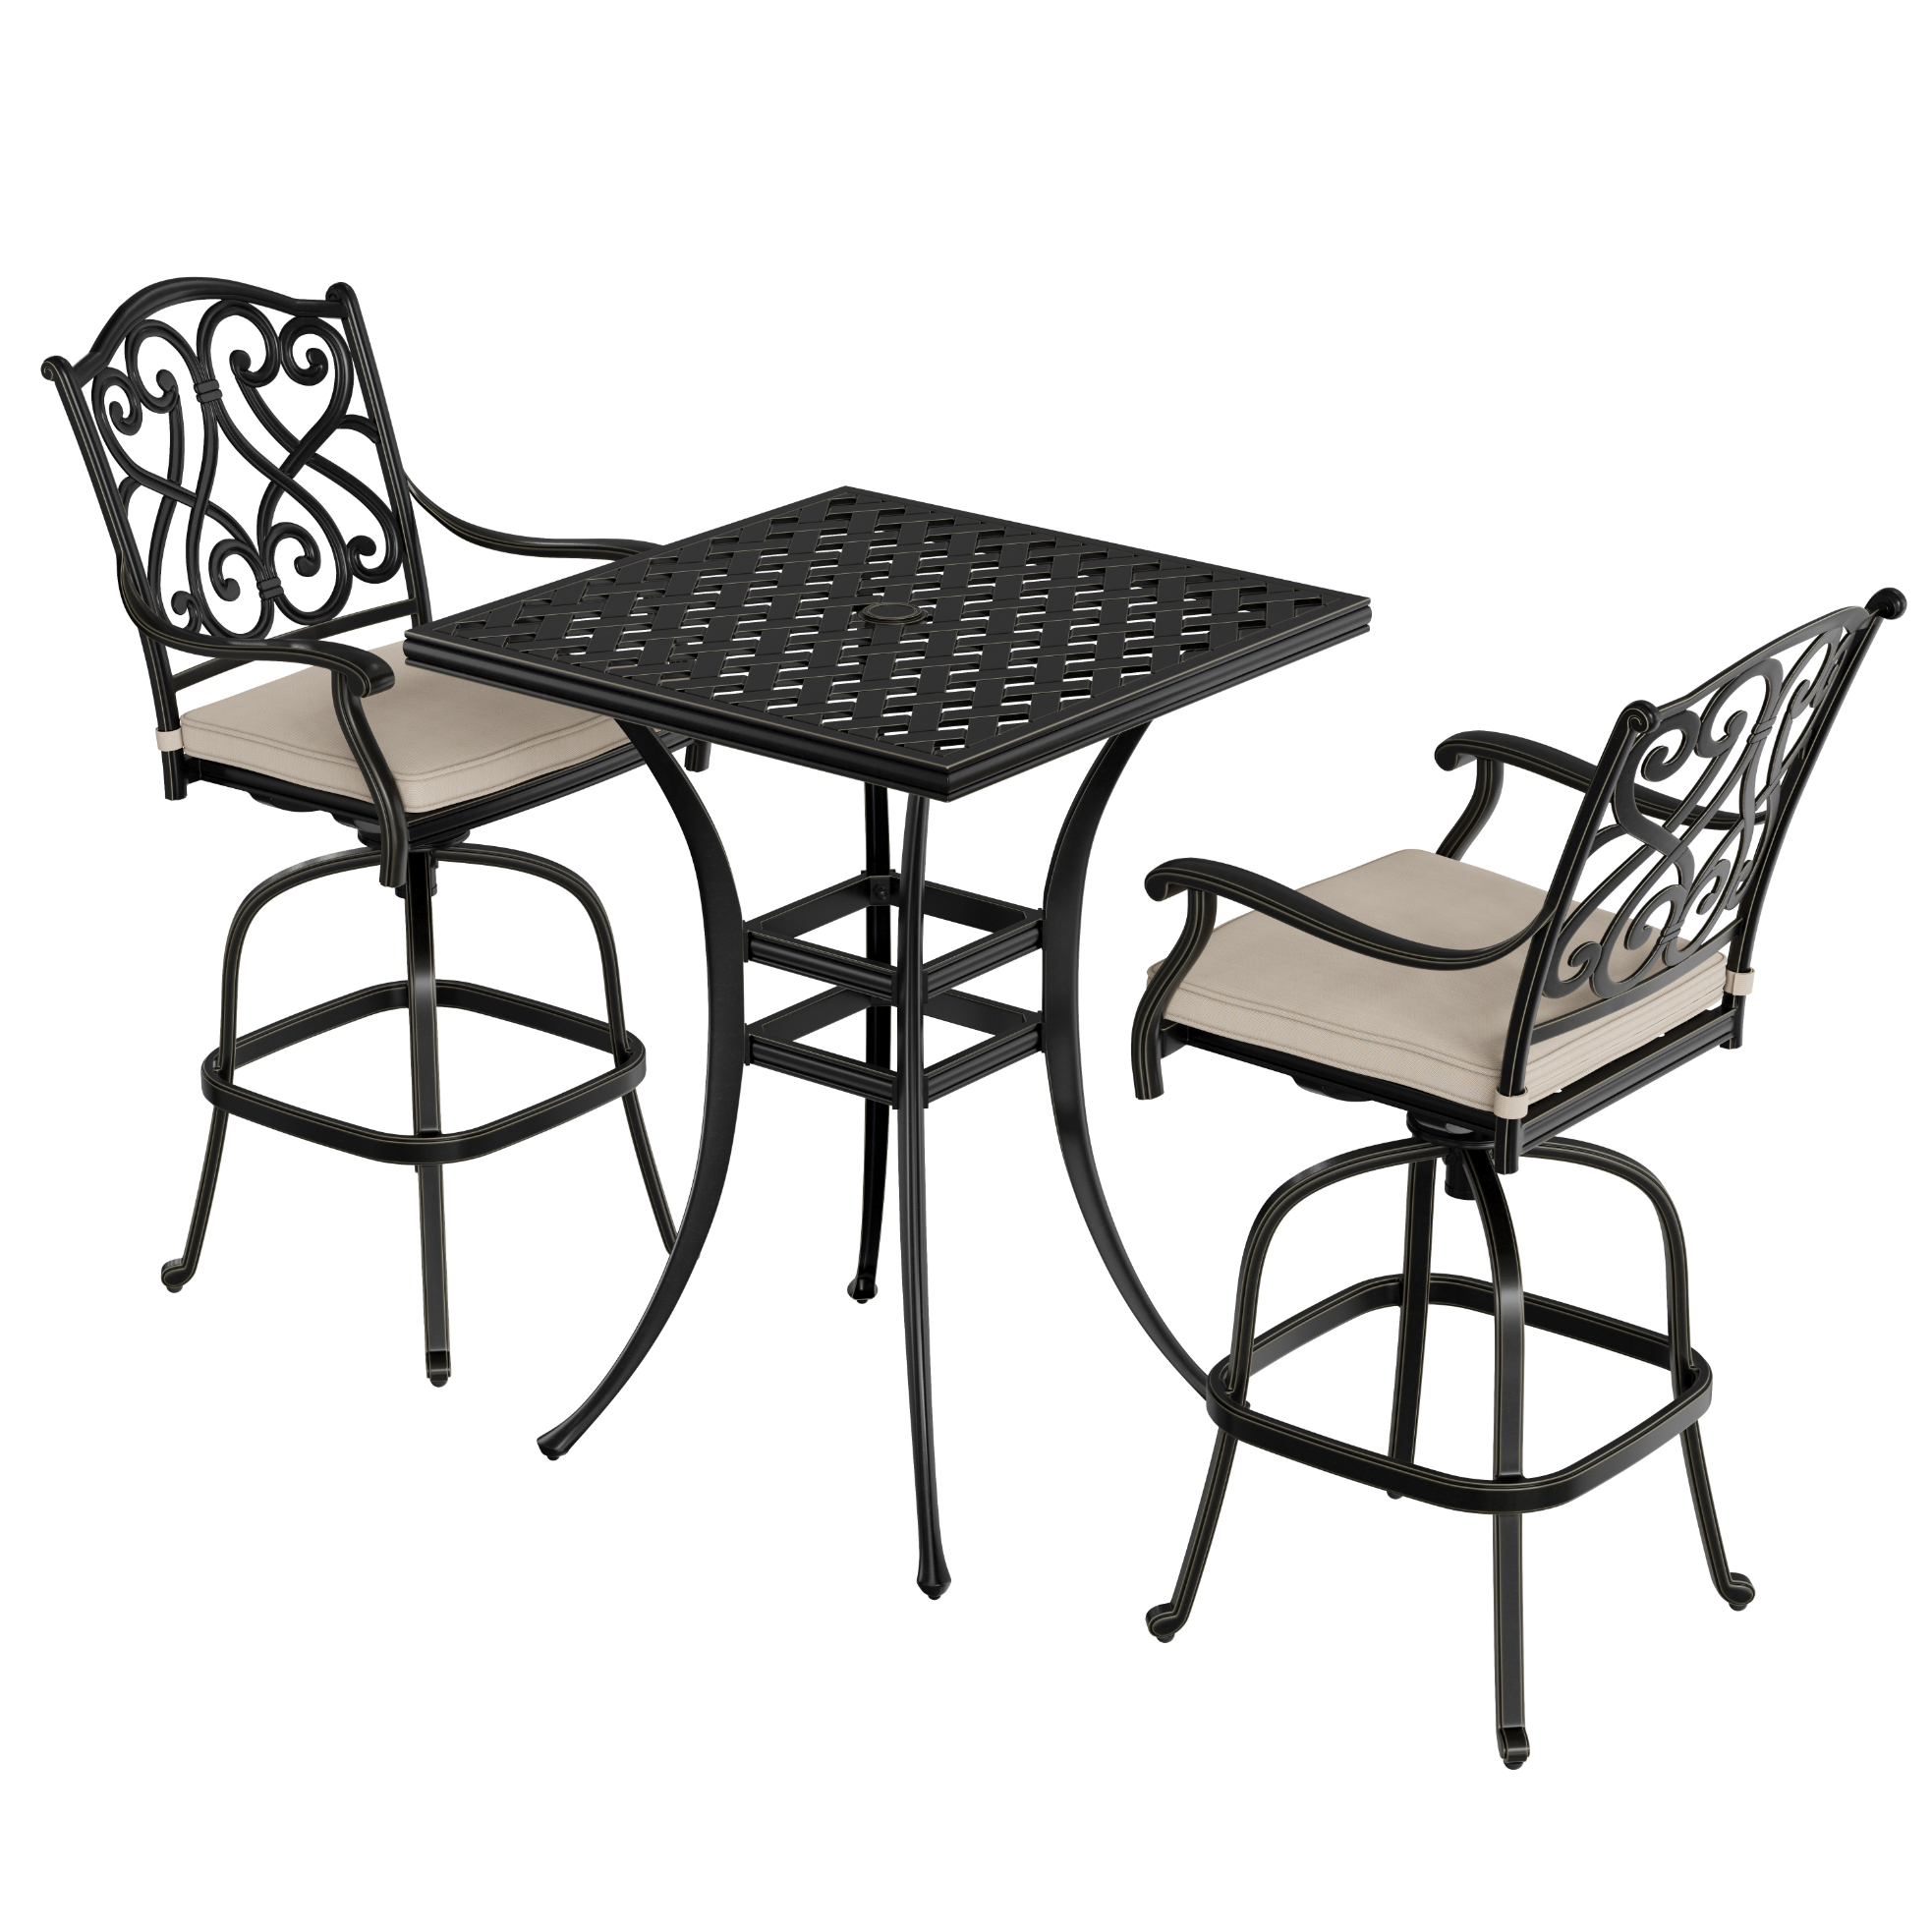 3-Piece Patio Bistro Set Cast Aluminum 2 High Bar Swivel Chairs with C